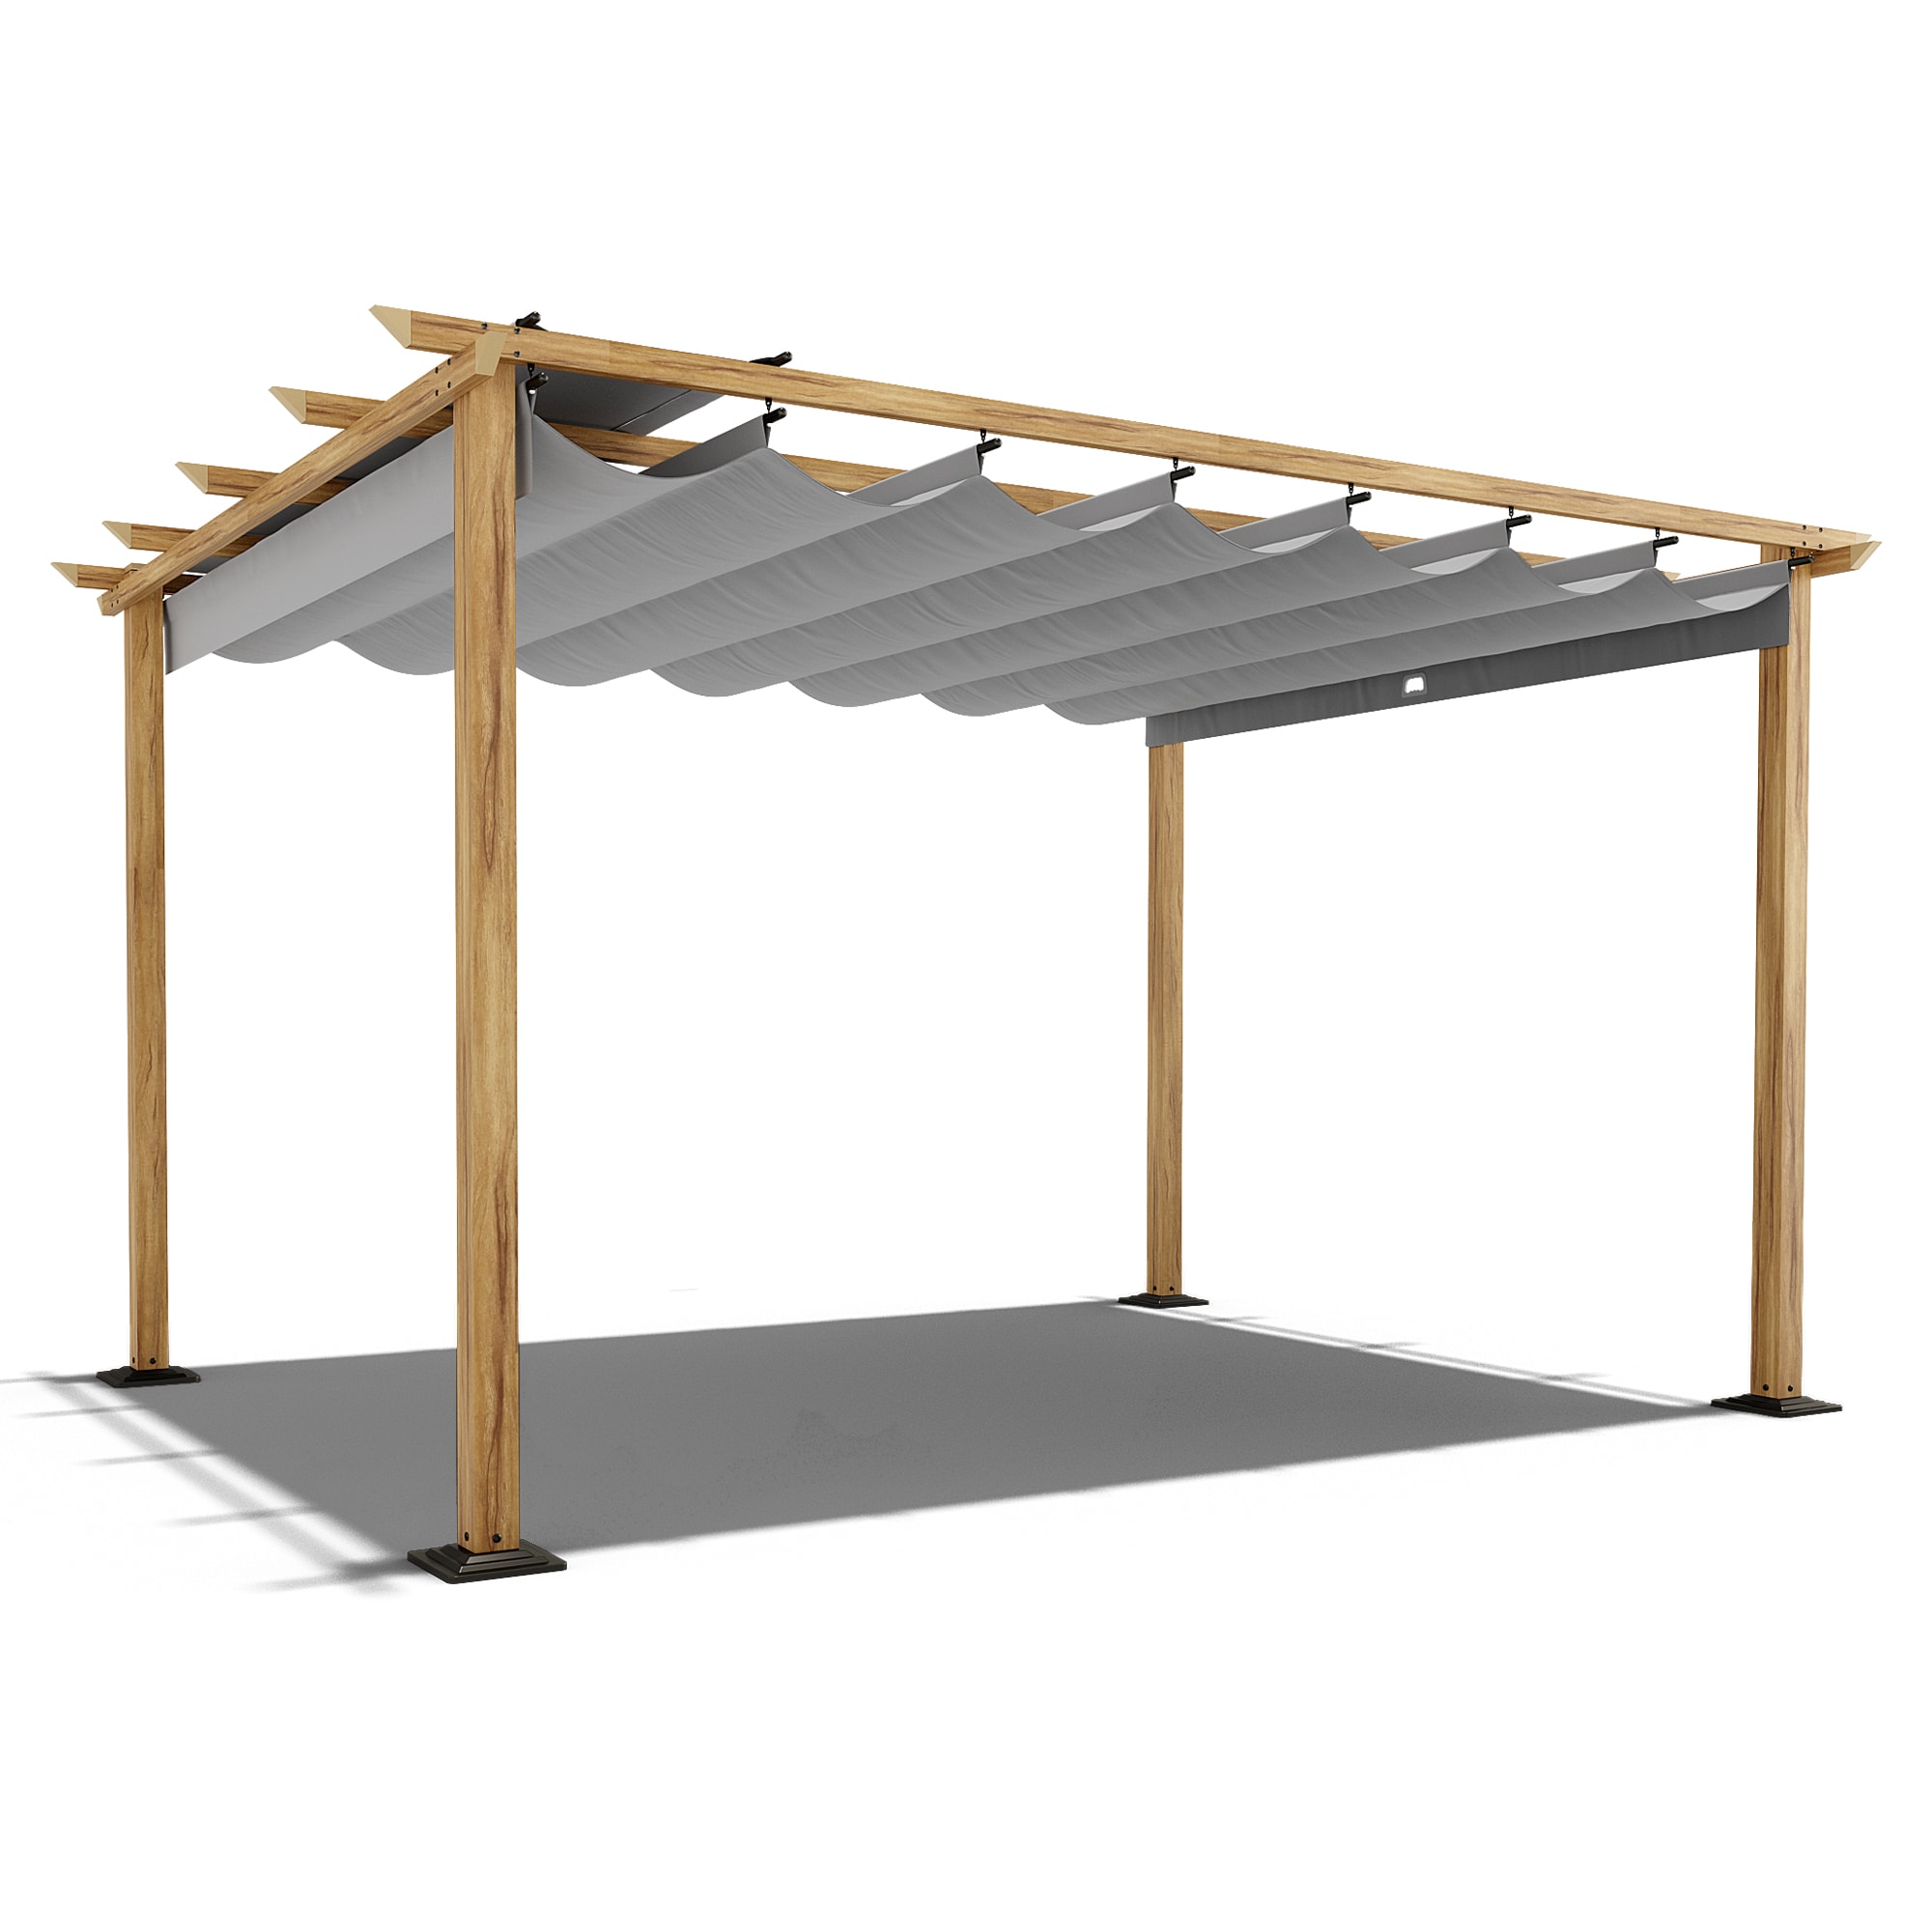 theorie opslag bijvoeglijk naamwoord 10-ft W x 13-ft L x 7-ft 3-in H Gray Metal Freestanding Pergola with Canopy  in the Pergolas department at Lowes.com